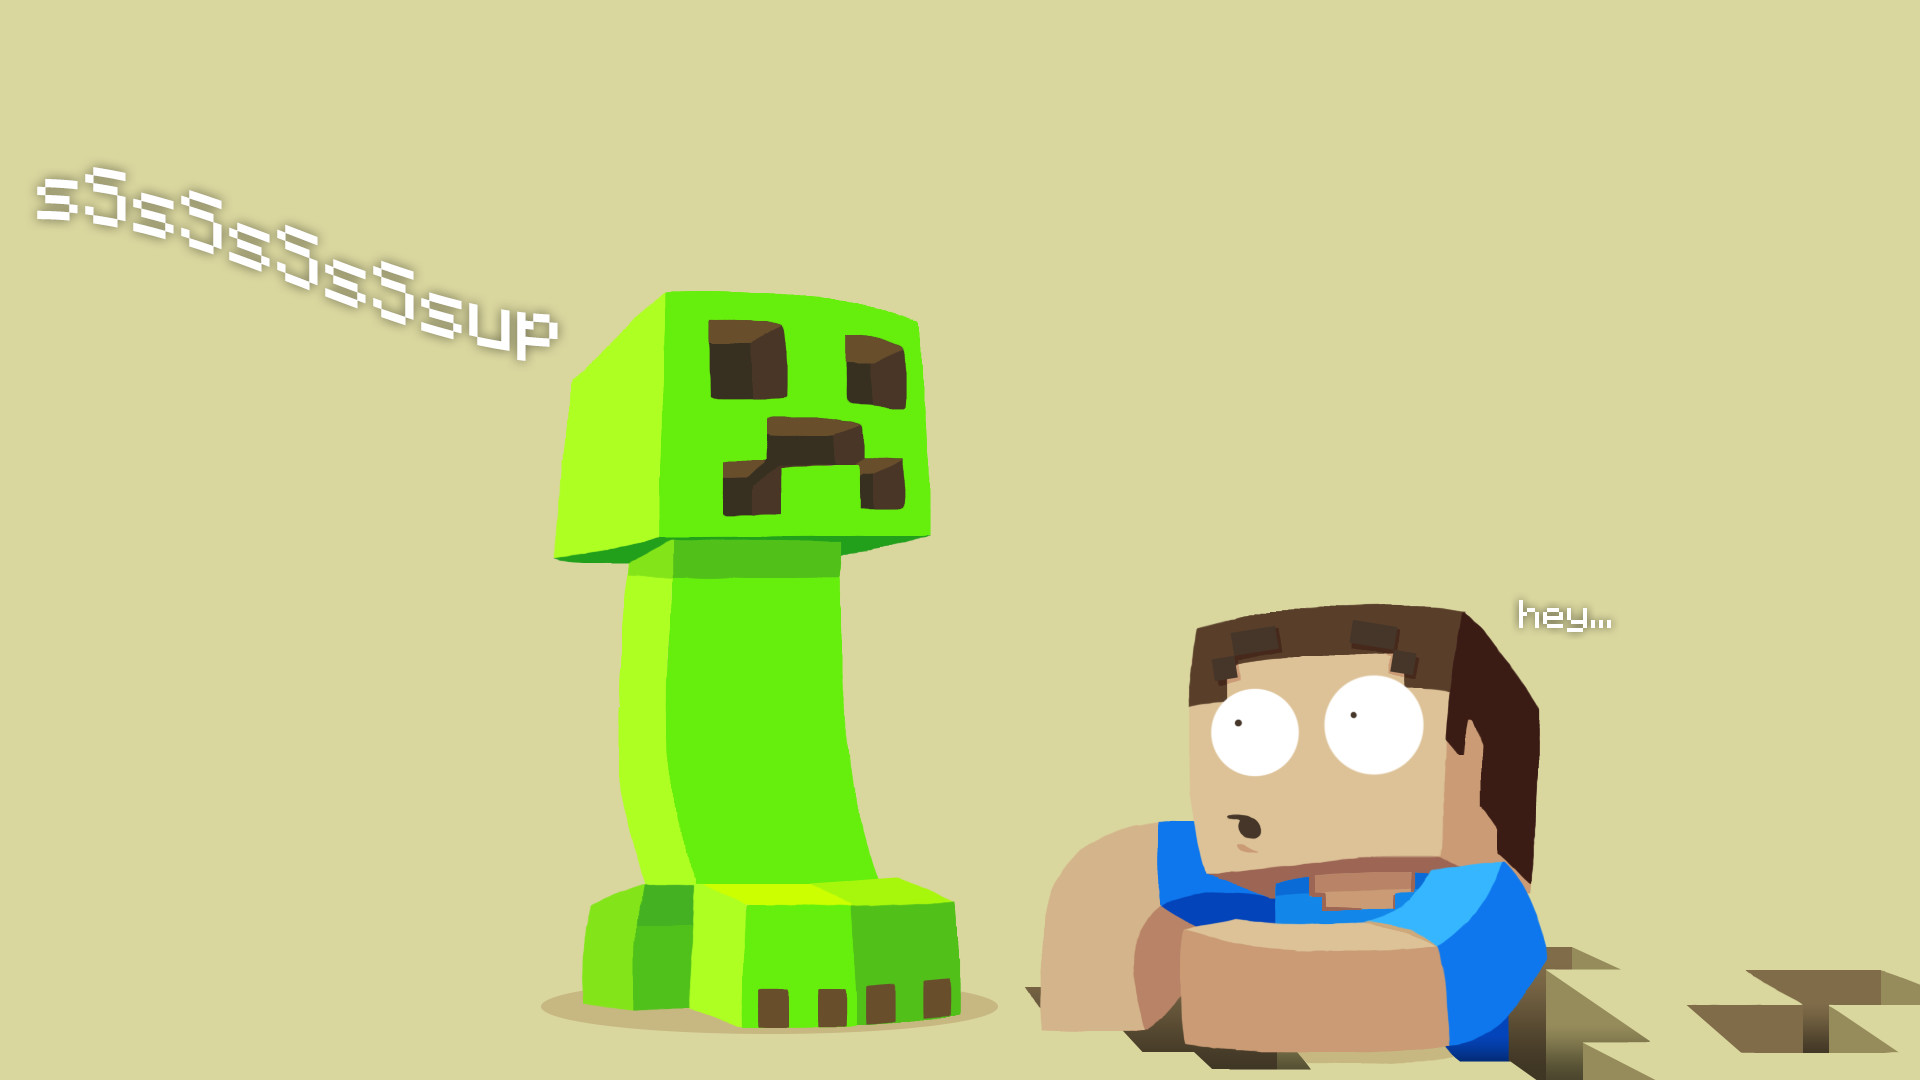 1920x1080 Flat Minecraft Wallpaper with a Creeper and Steve